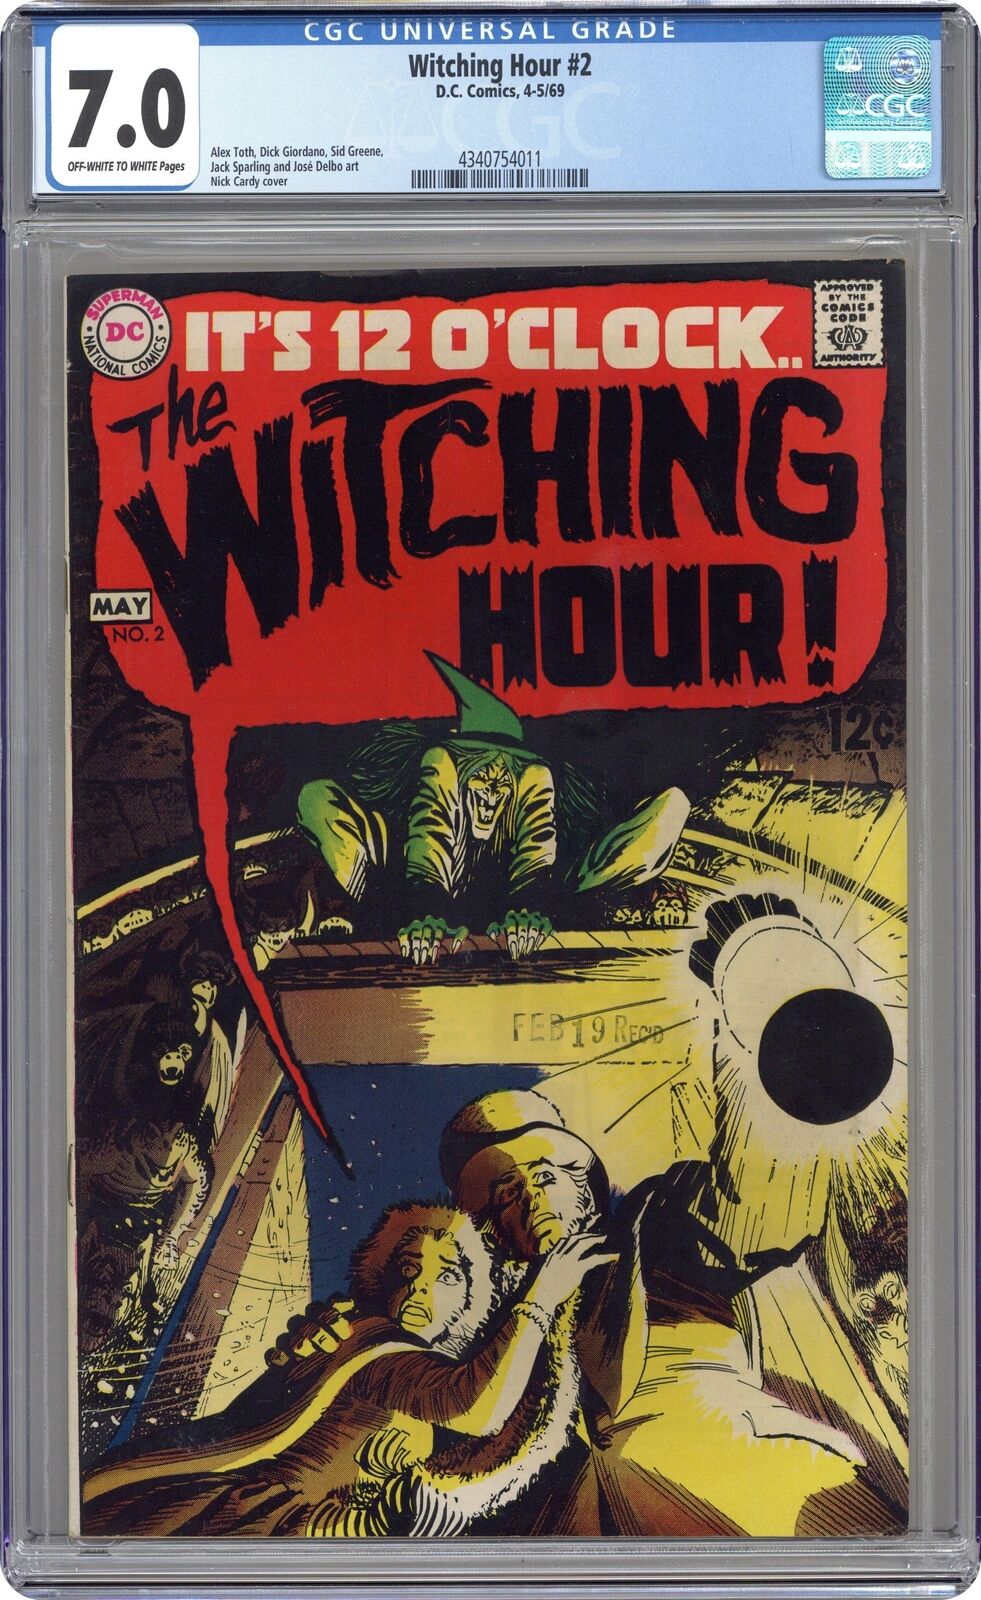 Witching Hour #2 CGC 7.0 1969 4340754011